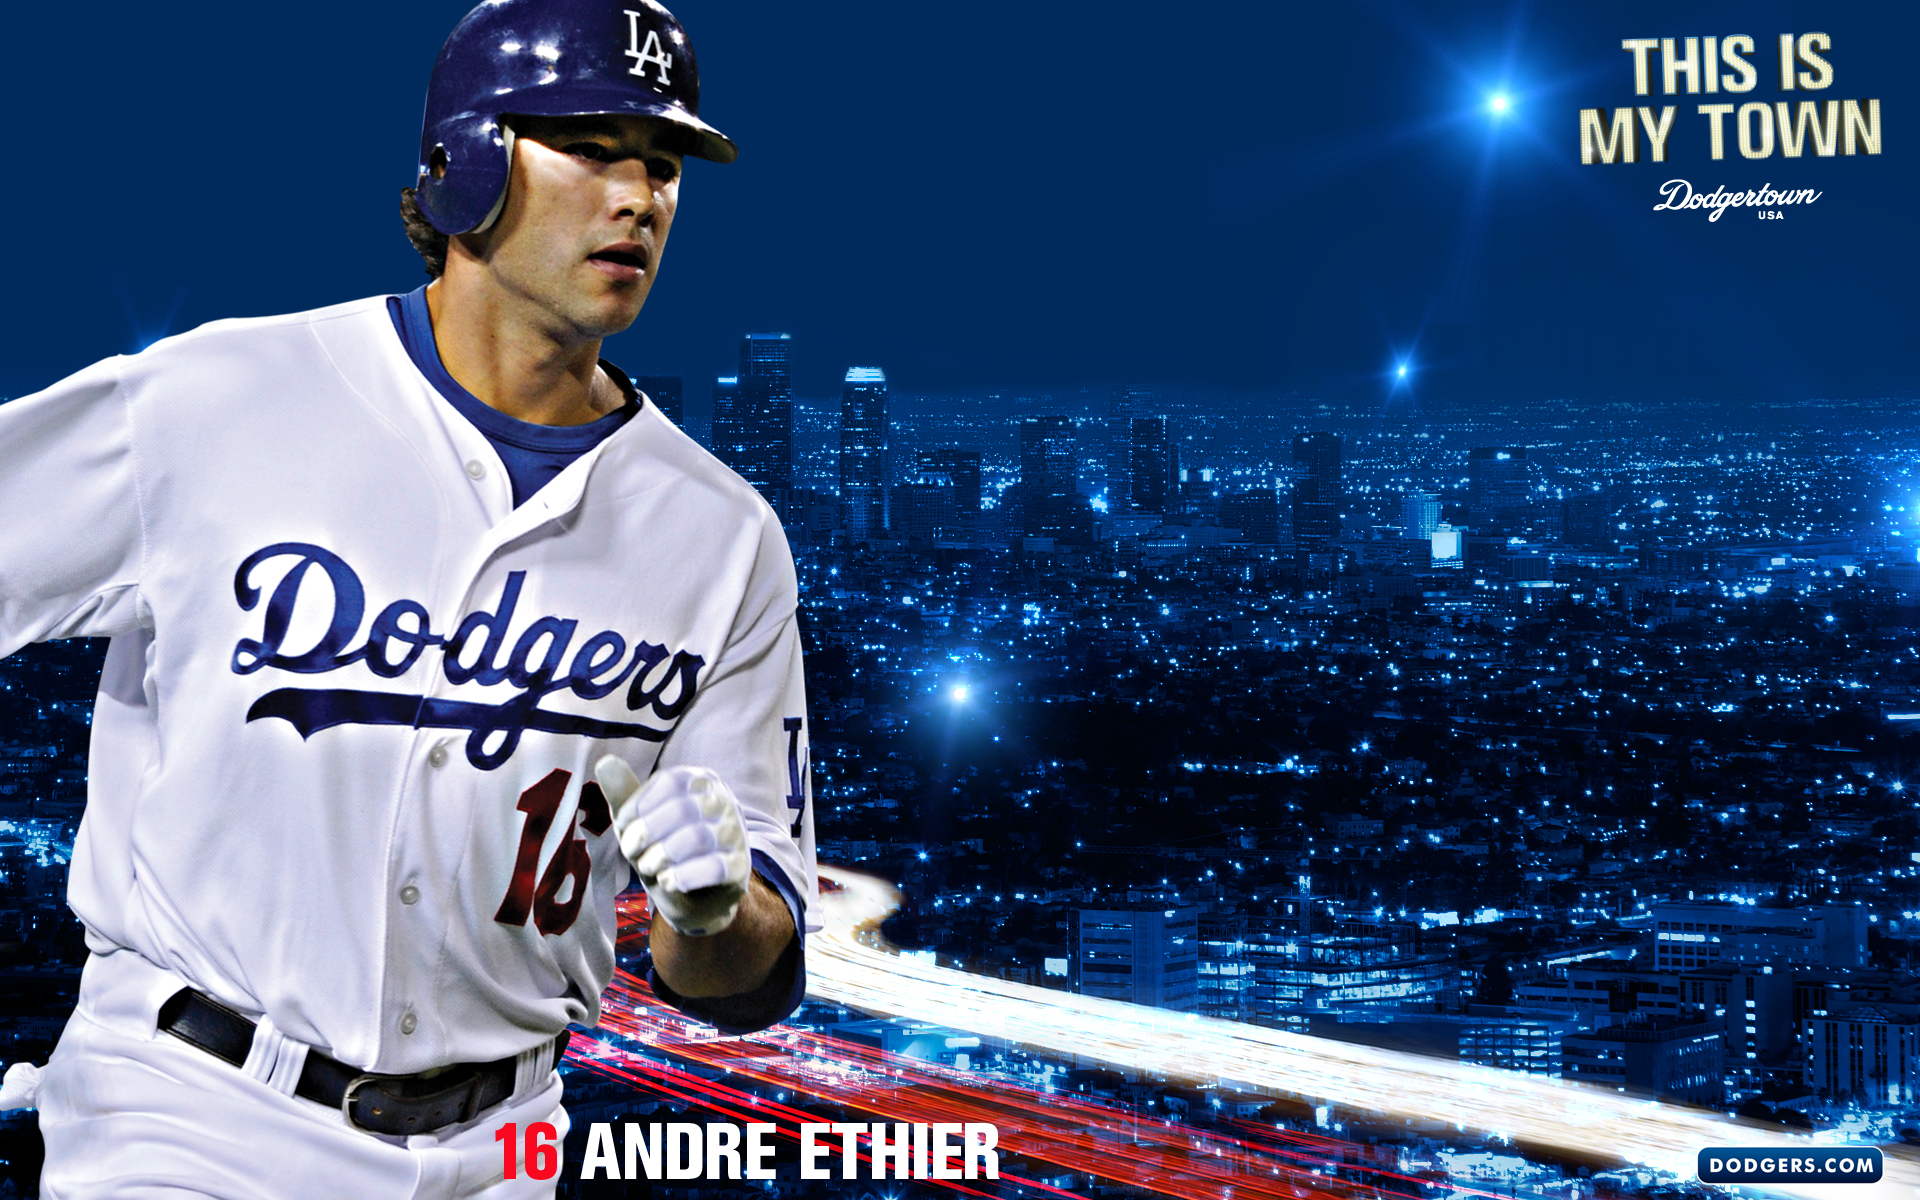  Angeles Dodgers wallpapers Los Angeles Dodgers background   Page 2